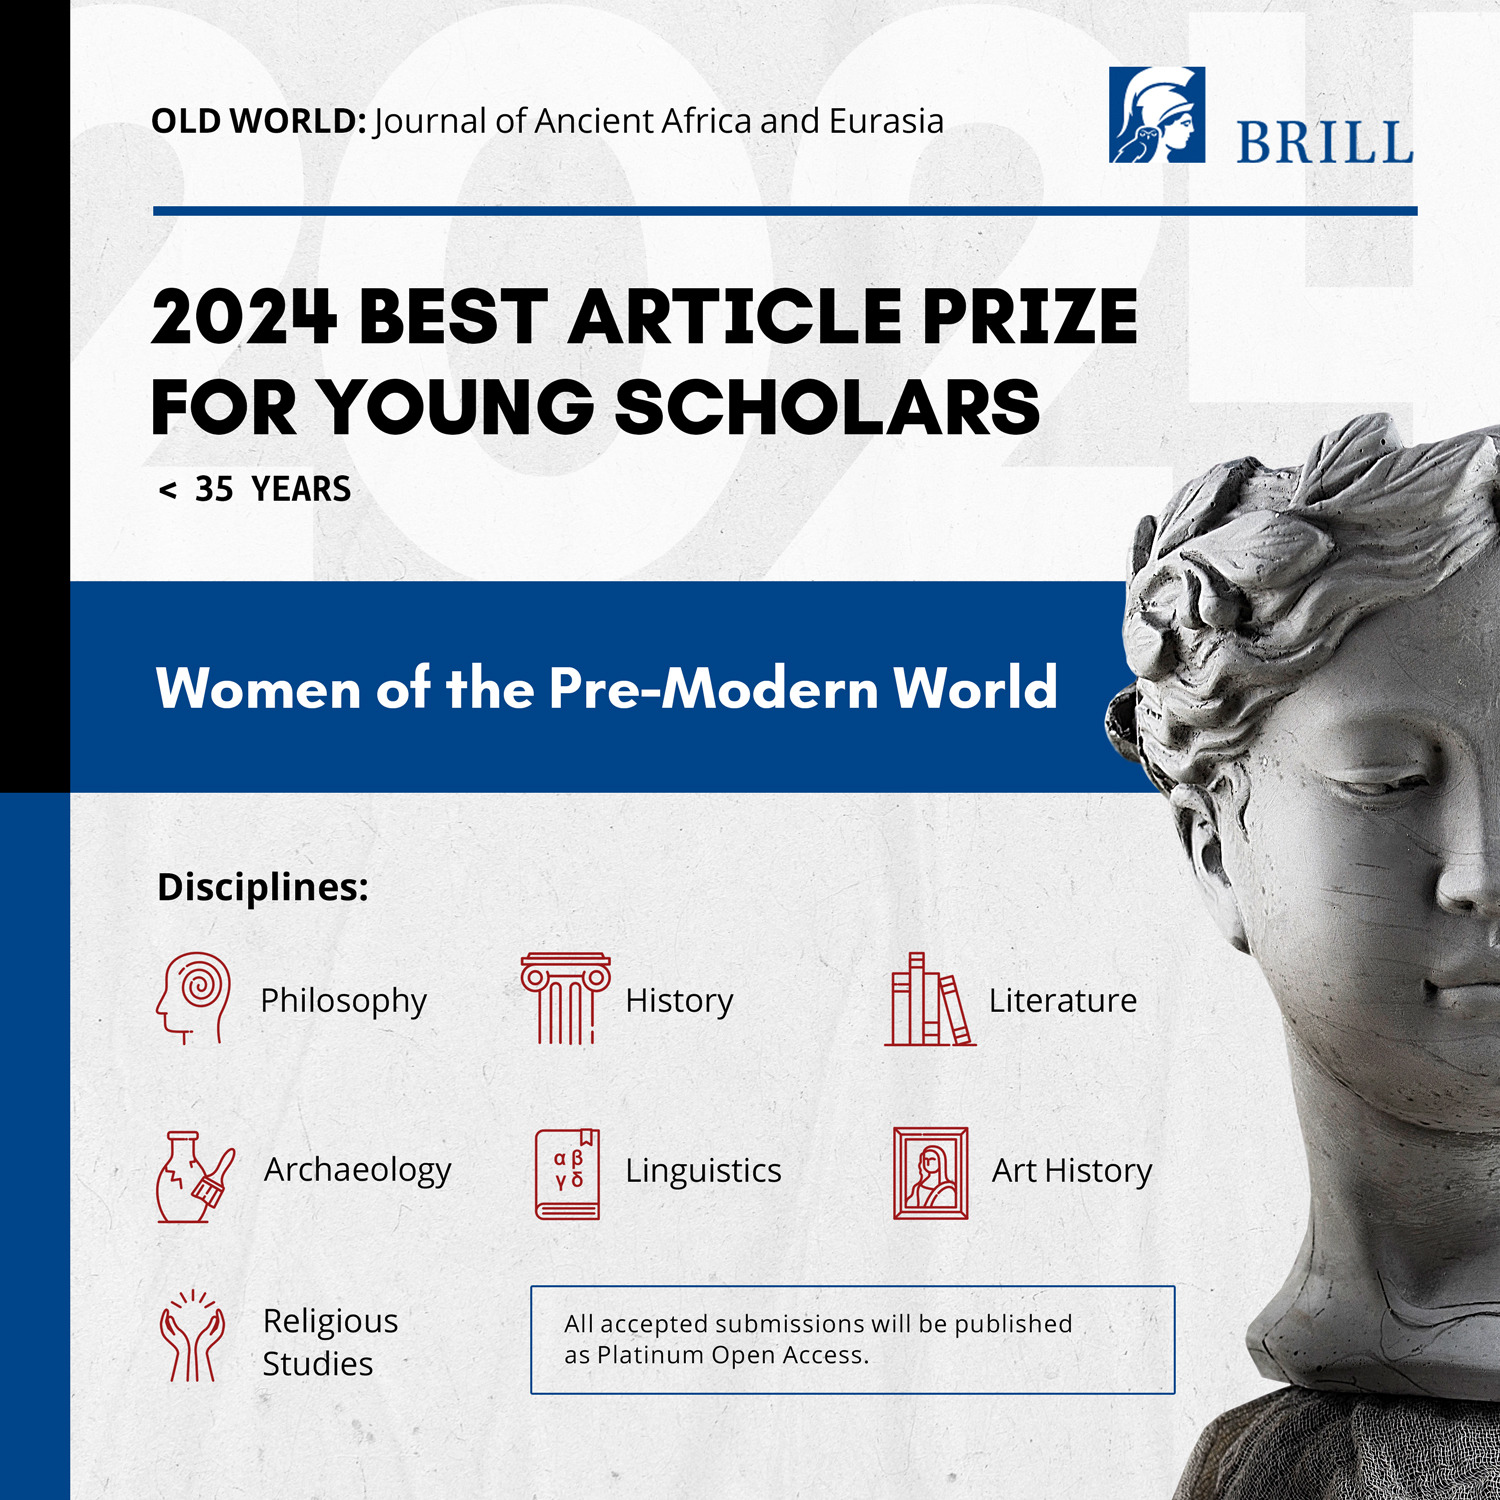 Old World's 2024 best article competition for young scholars: "Women of the Pre-Modern World"